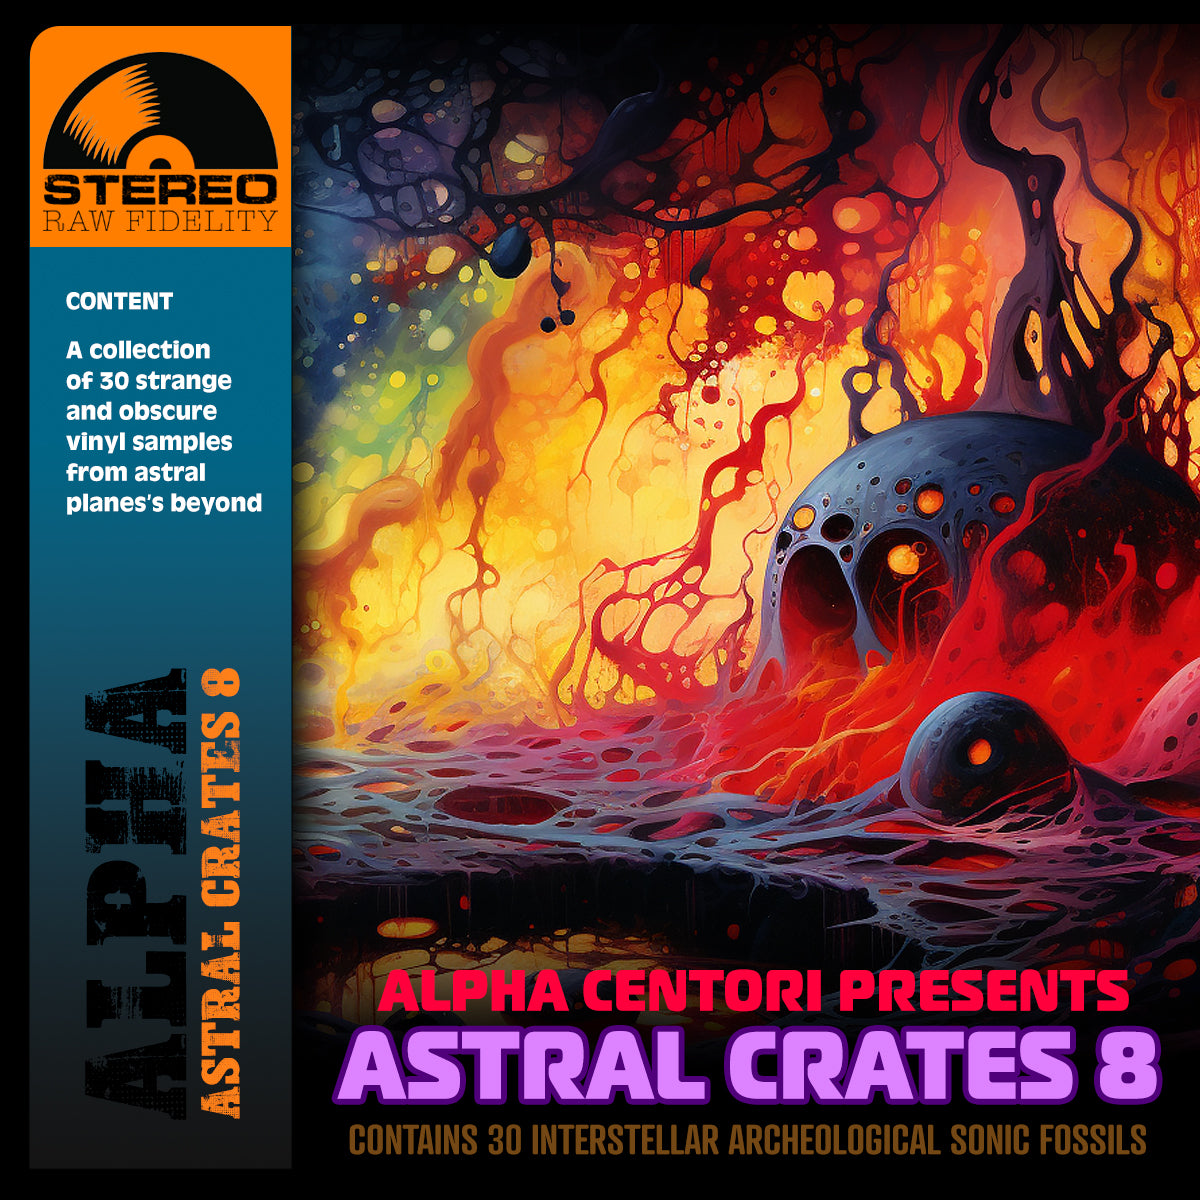 Astral Crates 8